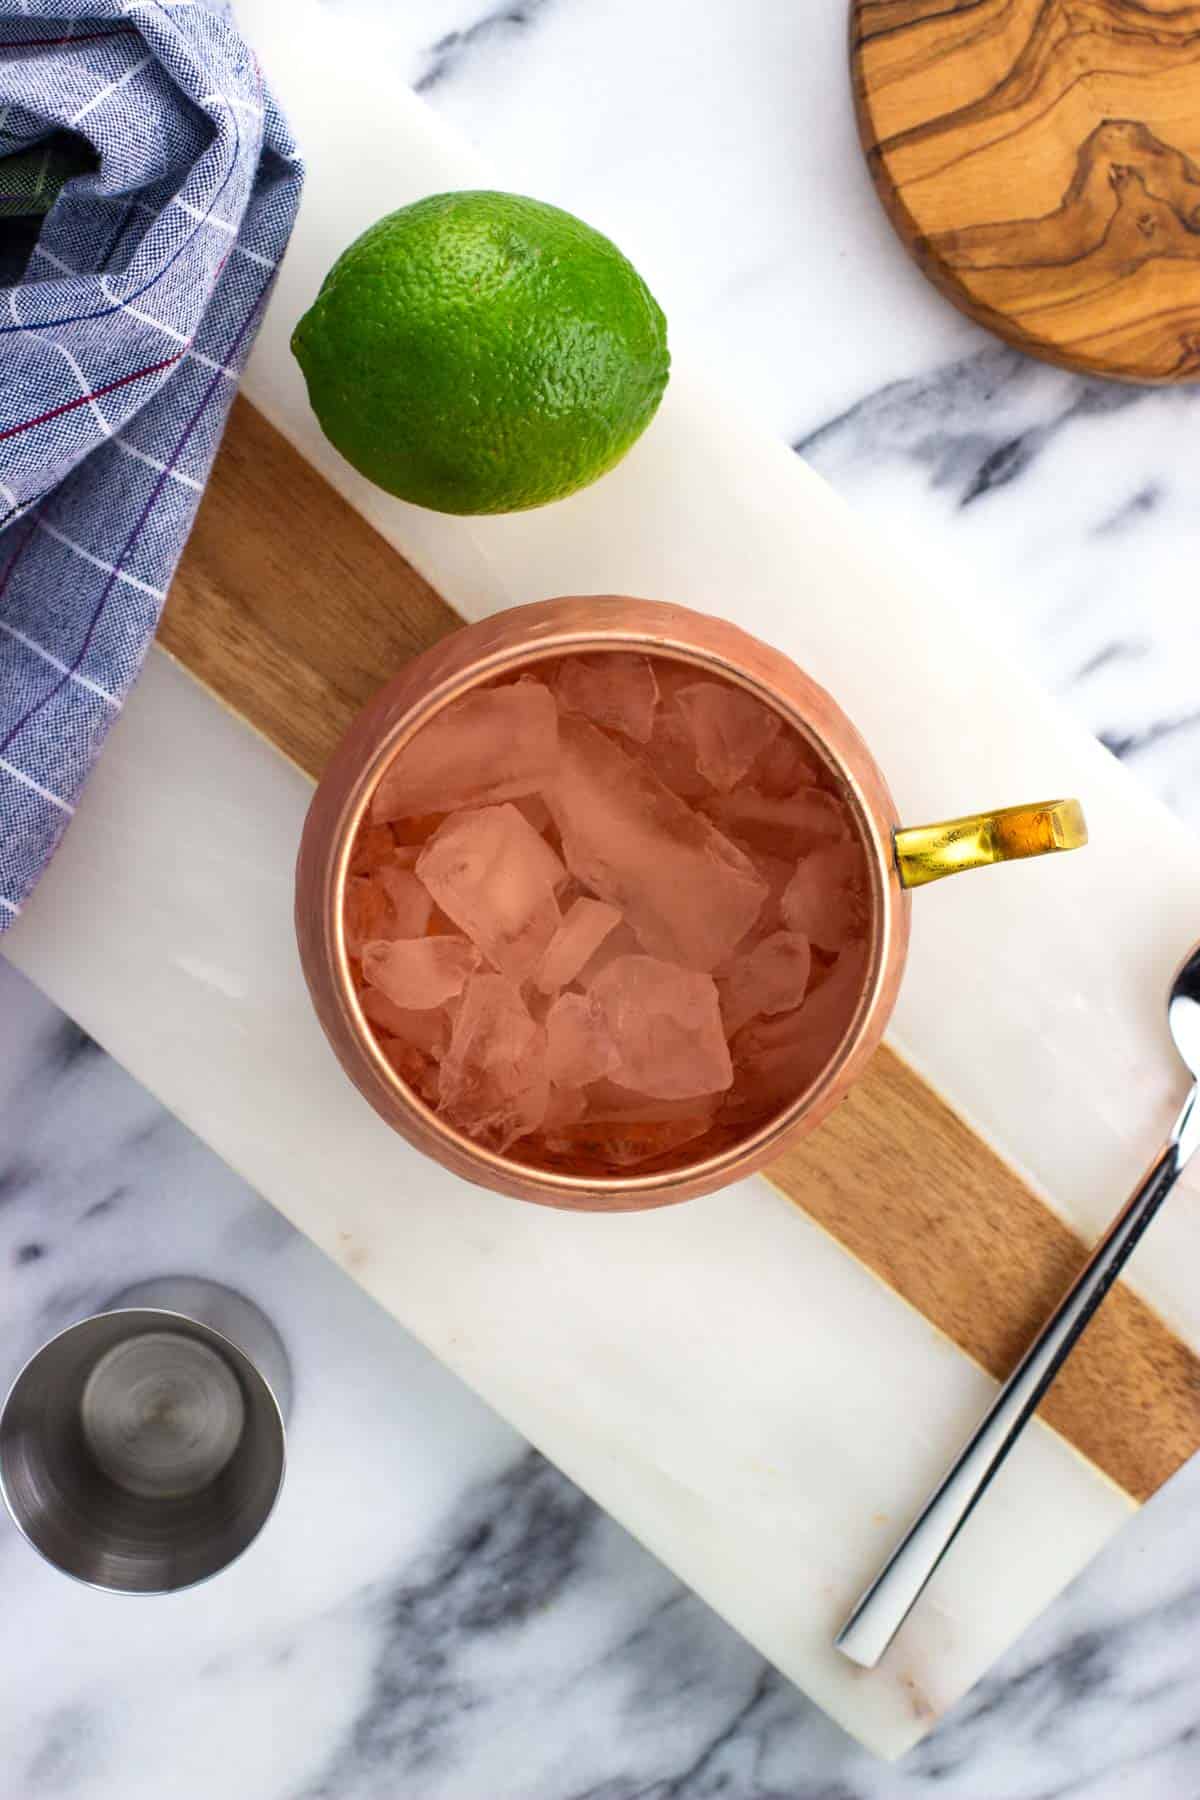 Crushed ice in a copper Moscow mule cup.